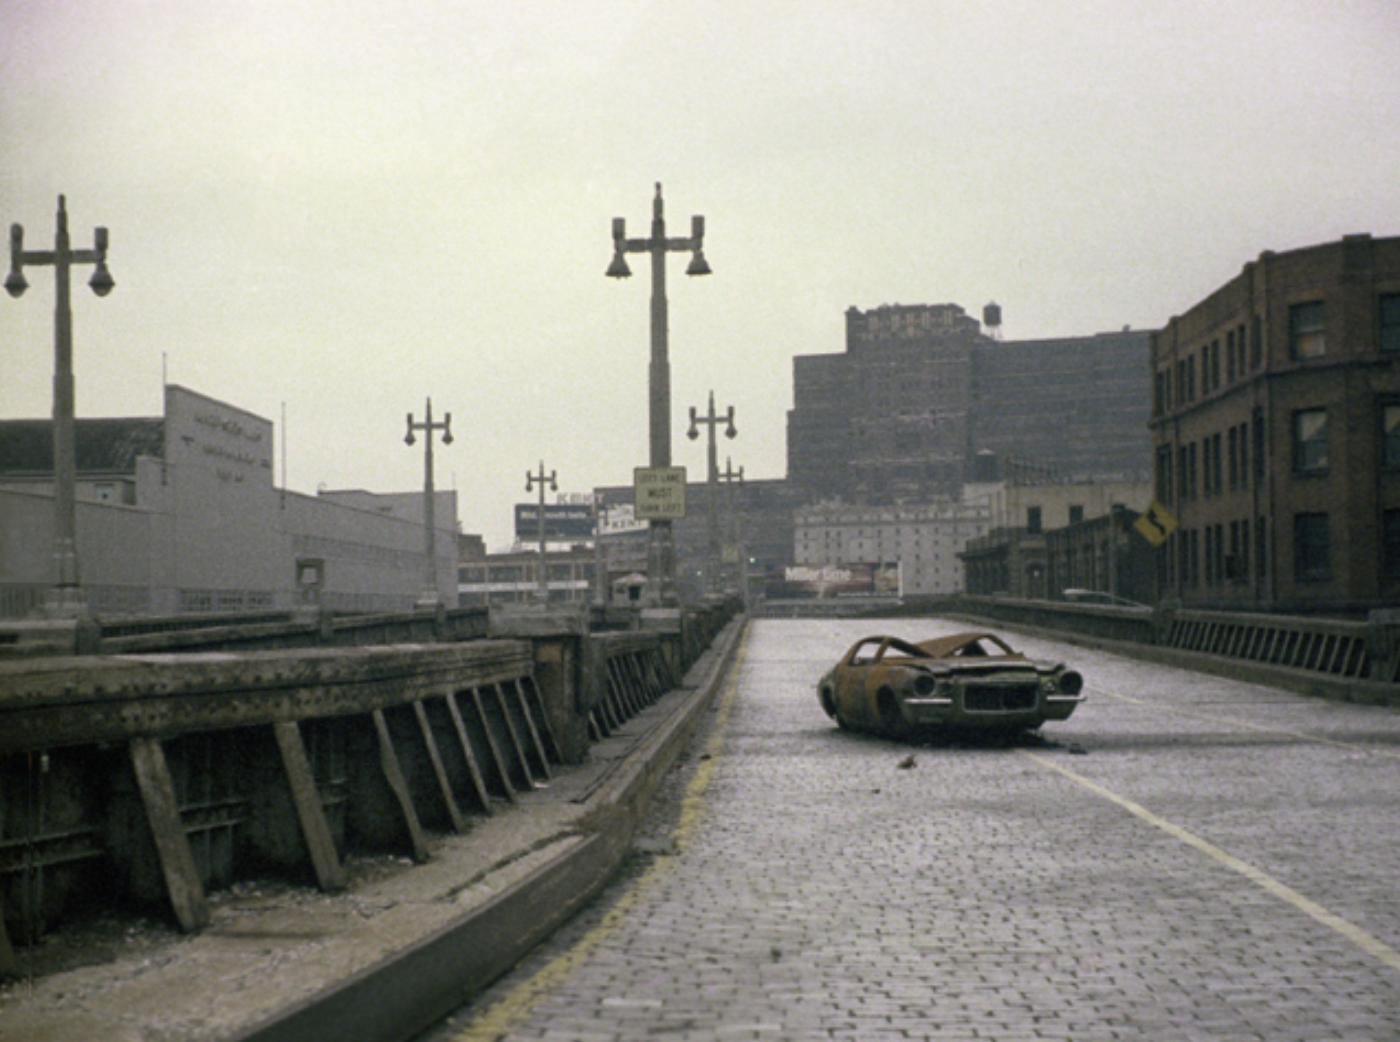 West Side Highway, 1975. Photo Credit: Andy Blair